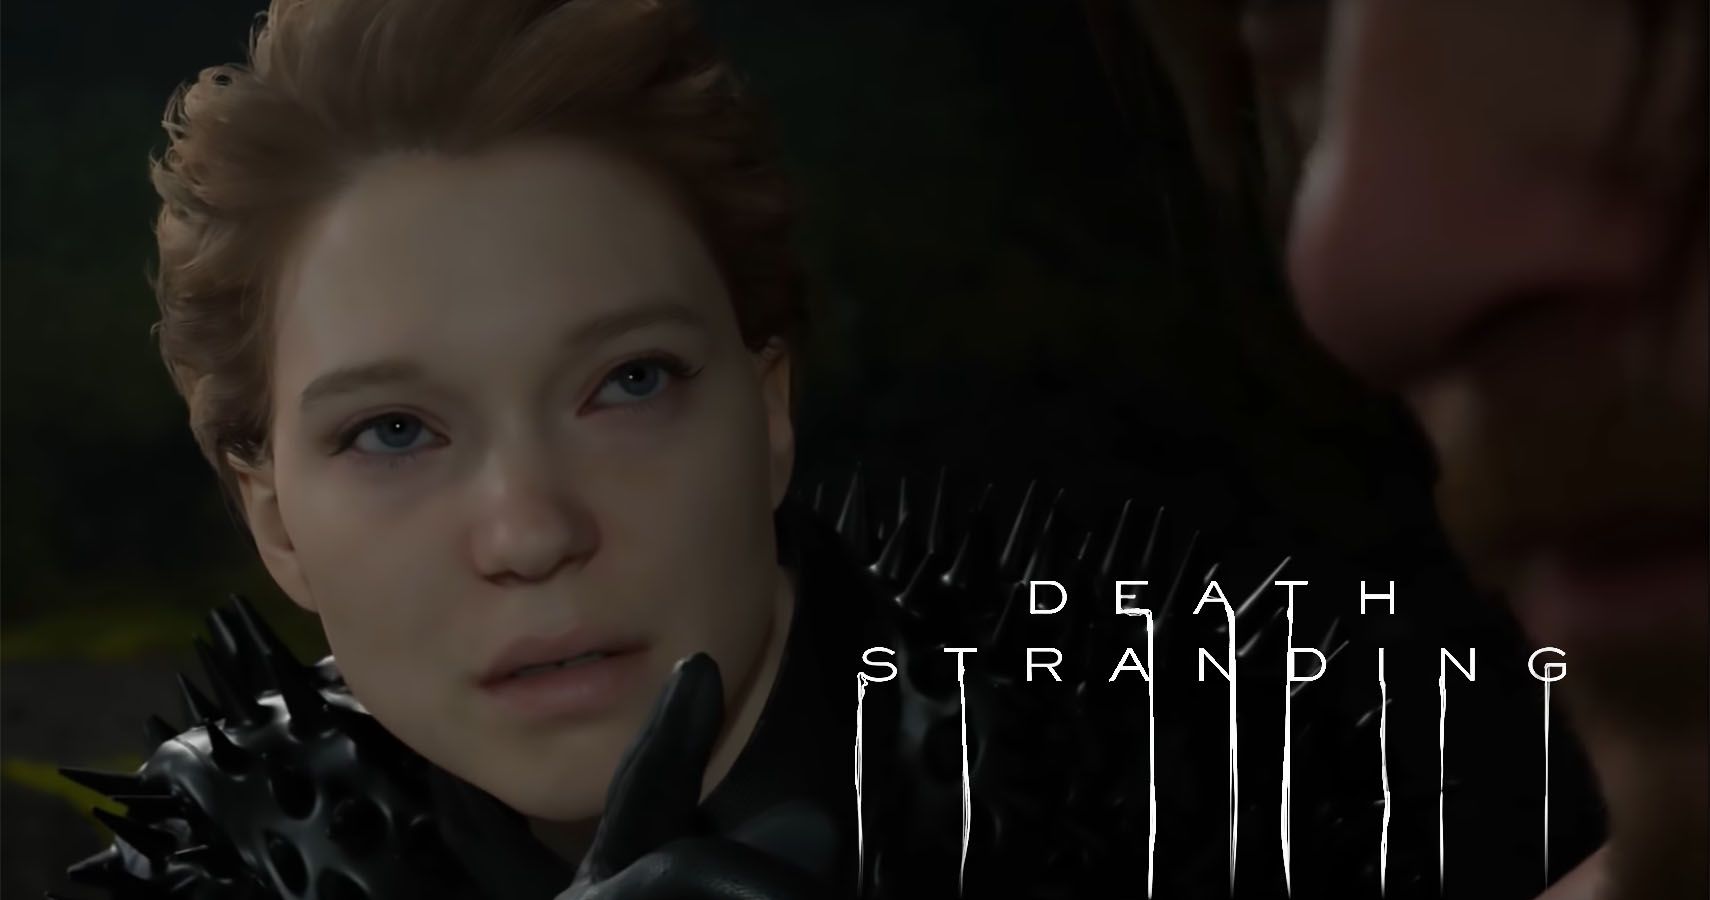 Image from the first cut-scene of Death Stranding